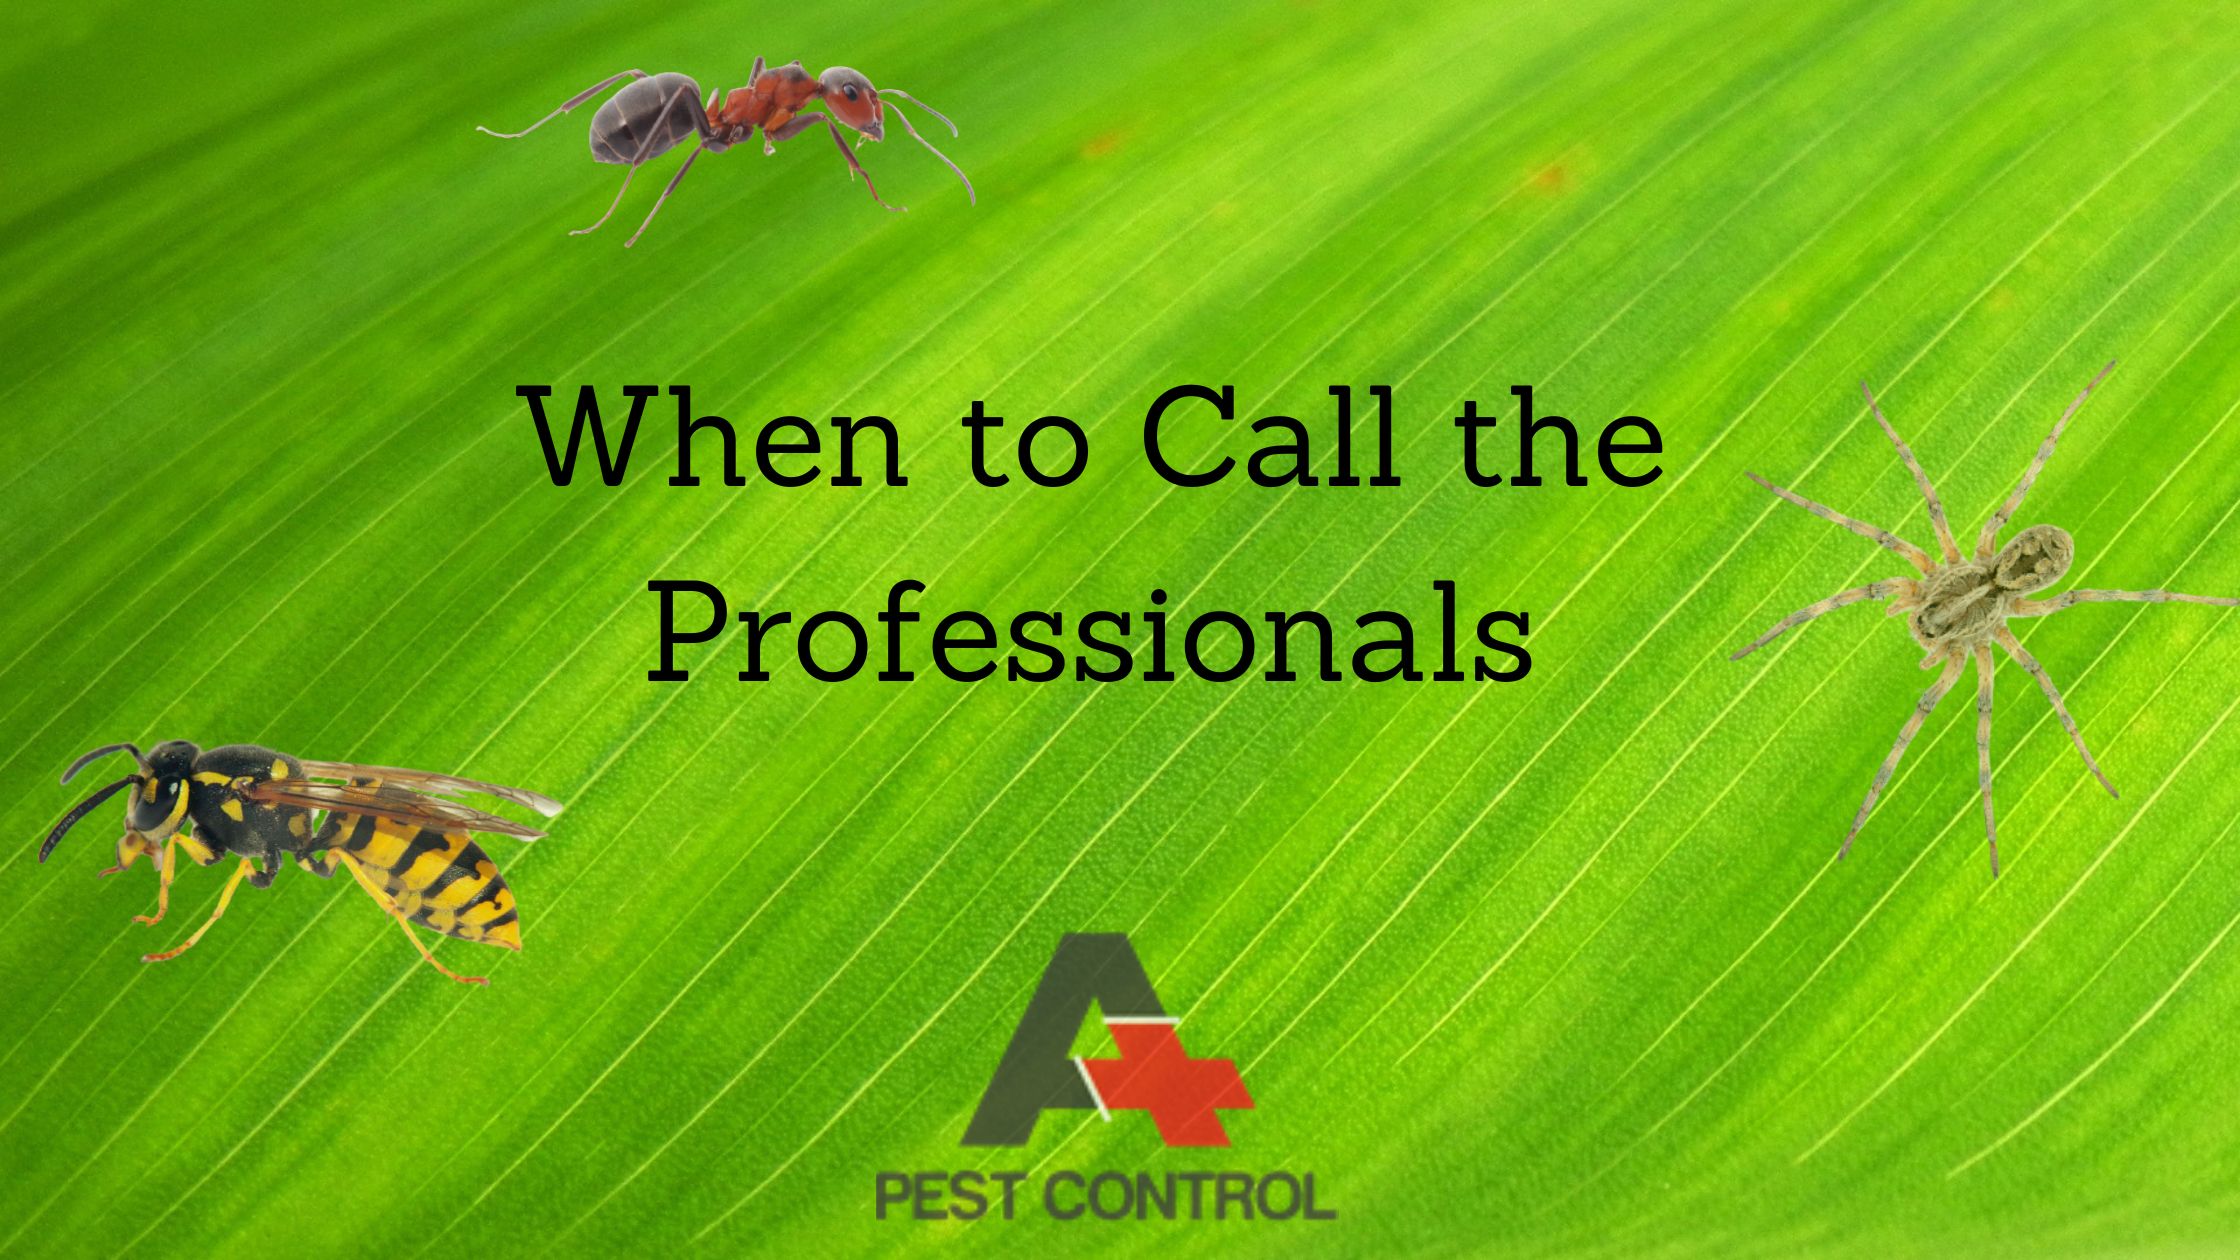 When to Call the Professionals